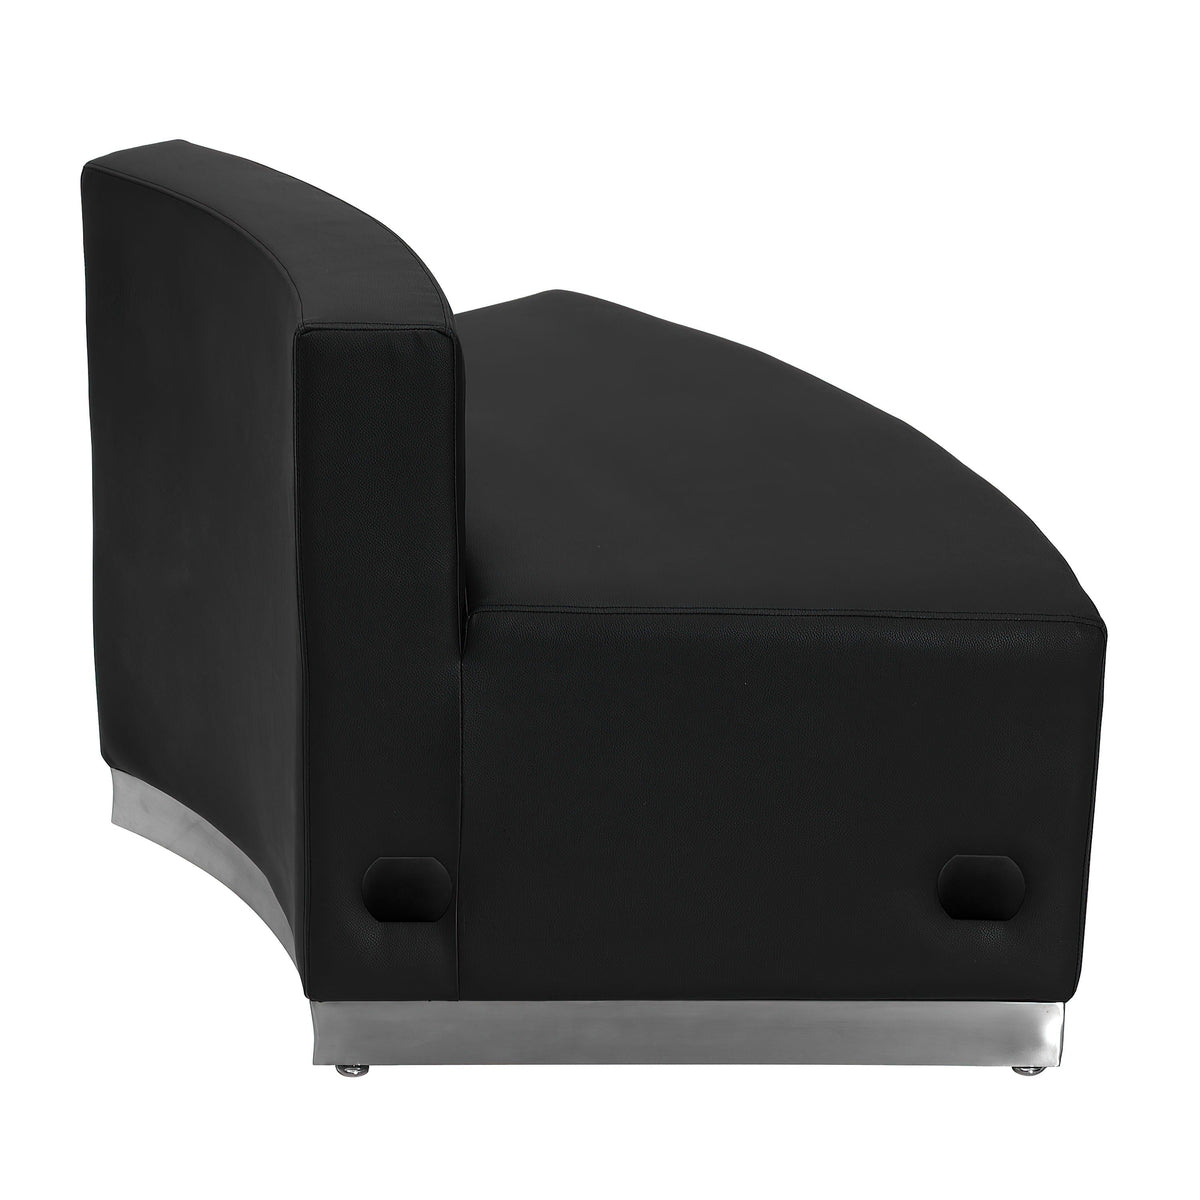 Black |#| Black LeatherSoft Convex Chair w/Stainless Steel Base - Reception Furniture